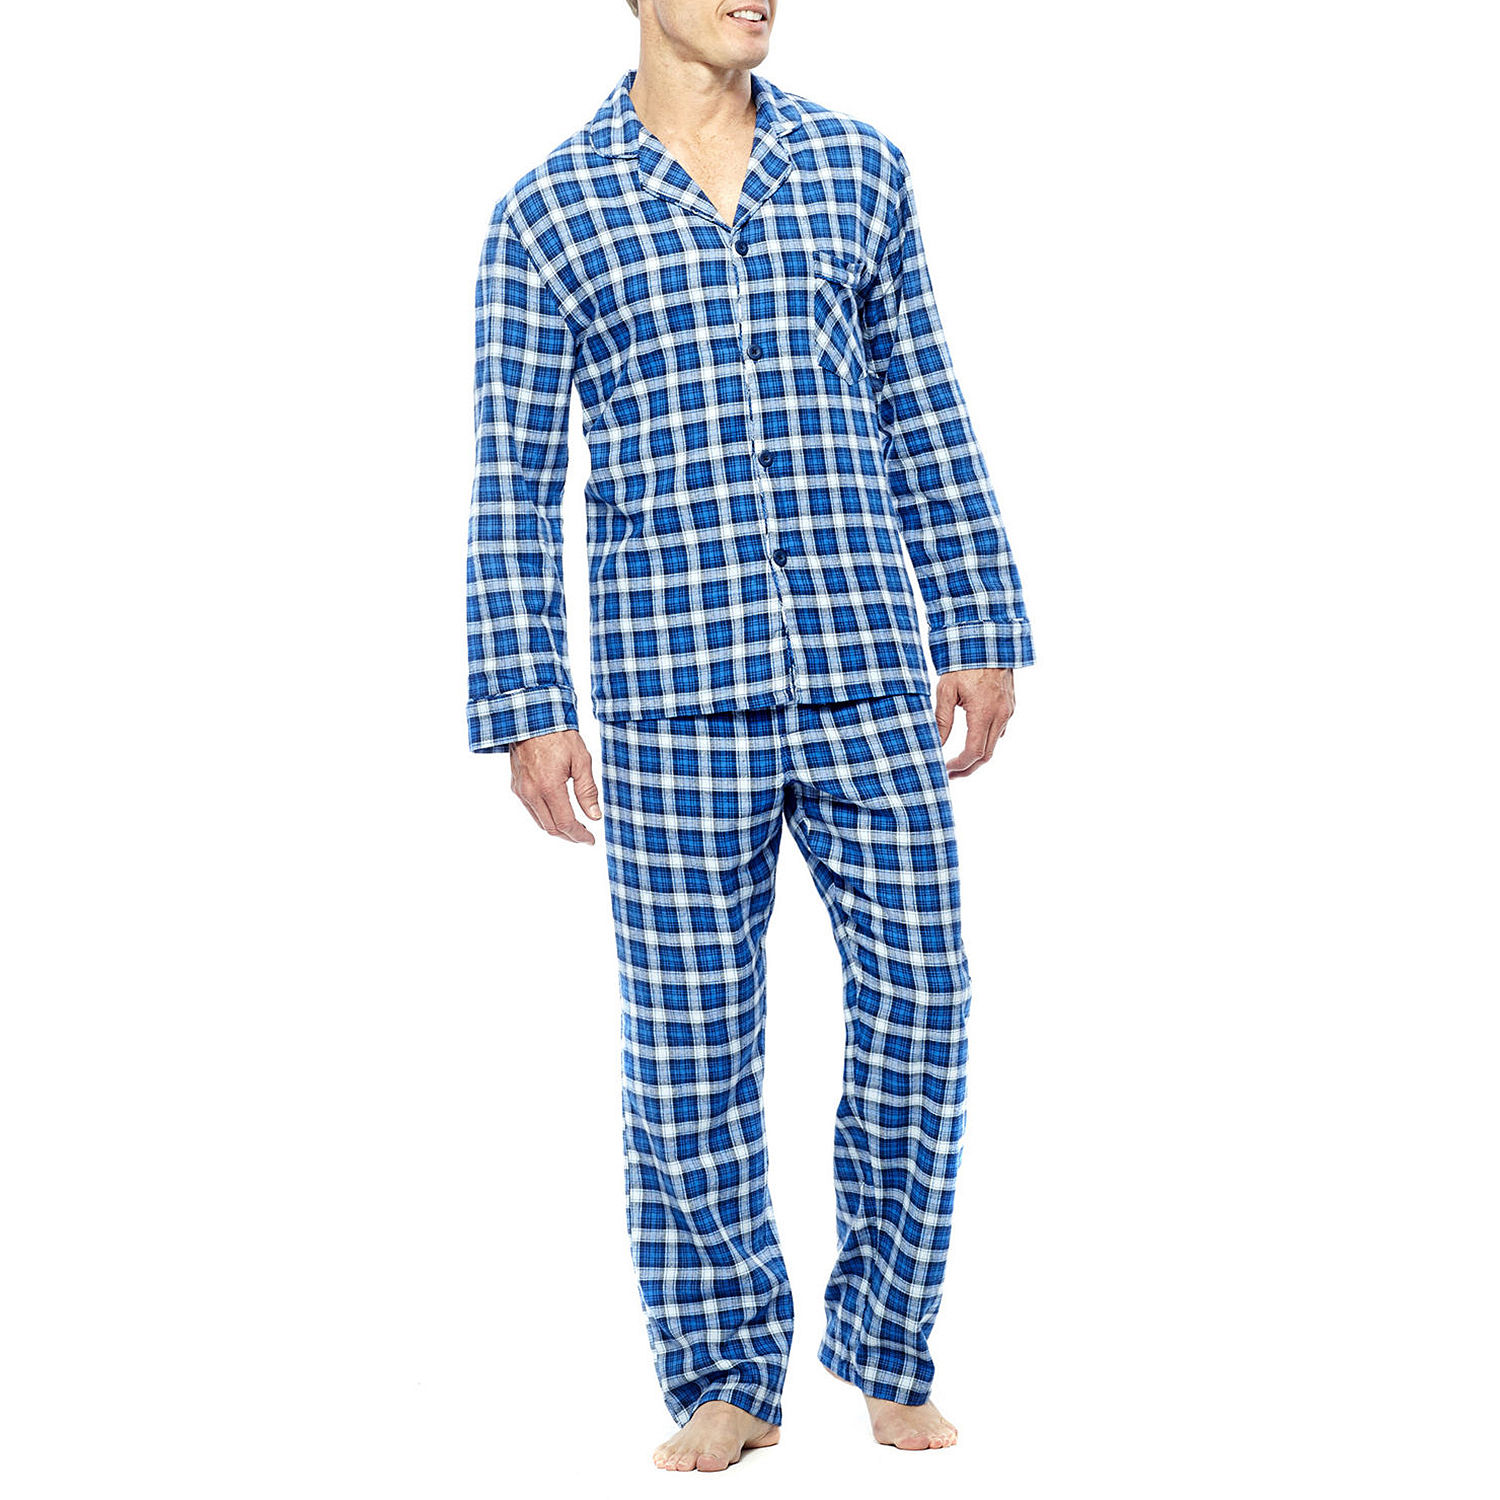 Hanes® Flannel Pajama Set-JCPenney